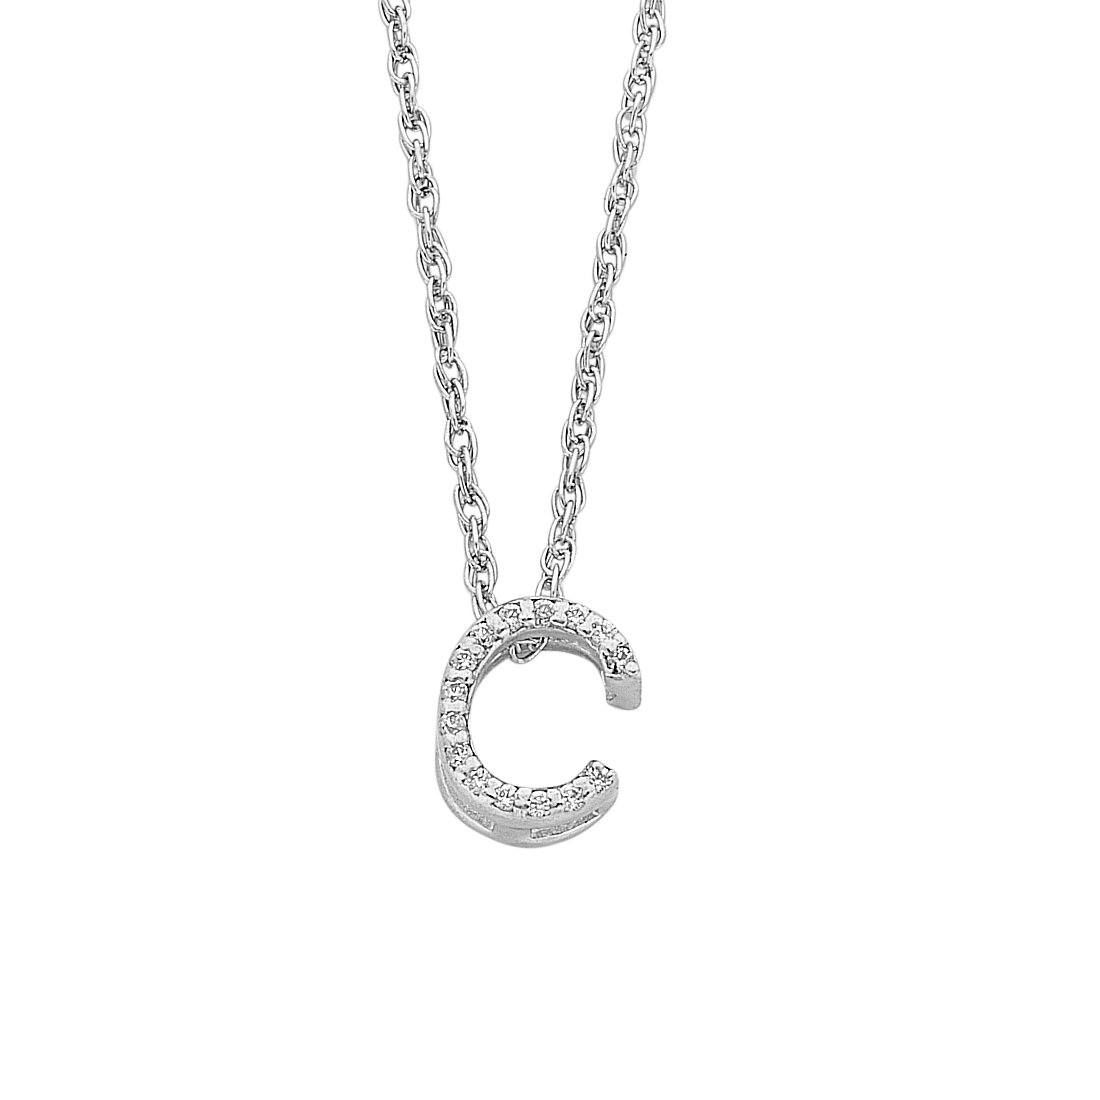 Sterling Silver Cubic Zirconia Initial Necklace Necklaces Bevilles C 